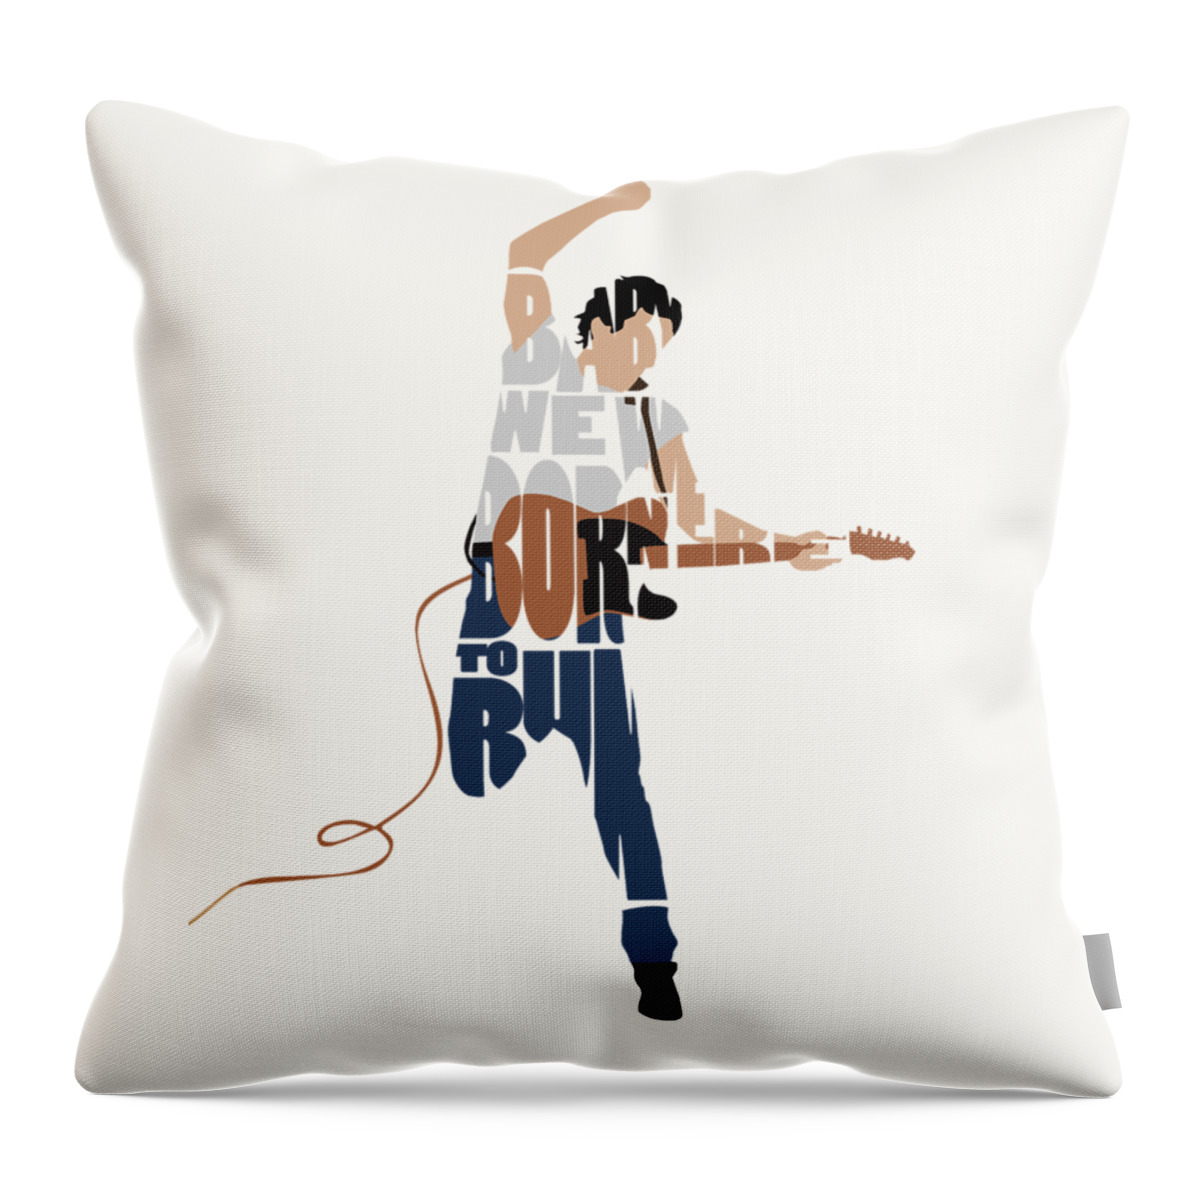 Bruce Springsteen Throw Pillow featuring the digital art Bruce Springsteen Typography Art by Inspirowl Design